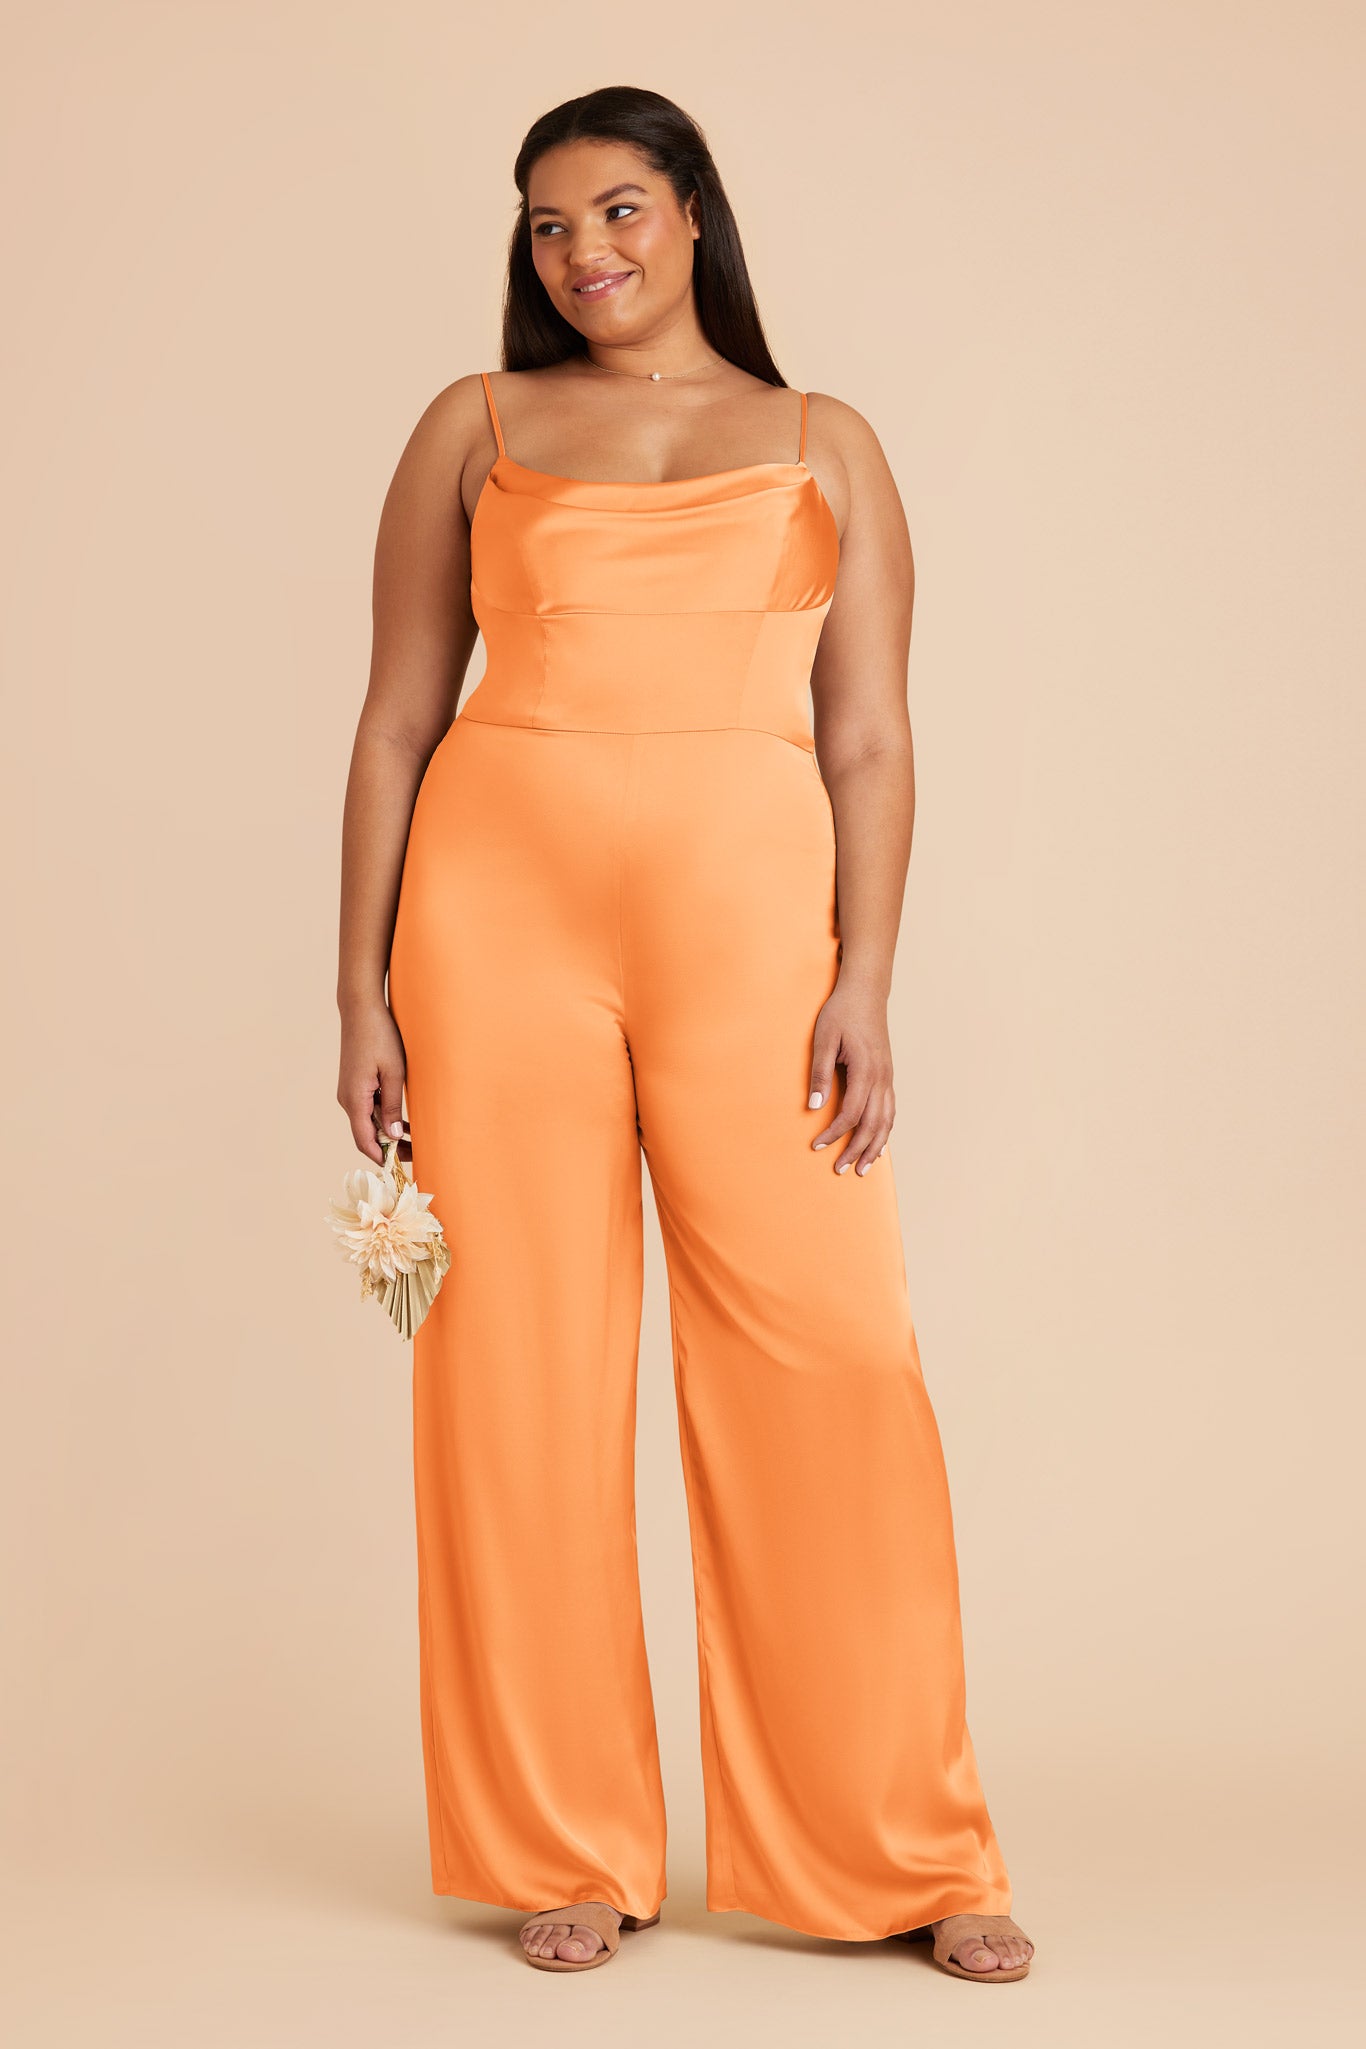 Apricot Donna Matte Satin Bridesmaid Jumpsuit by Birdy Grey